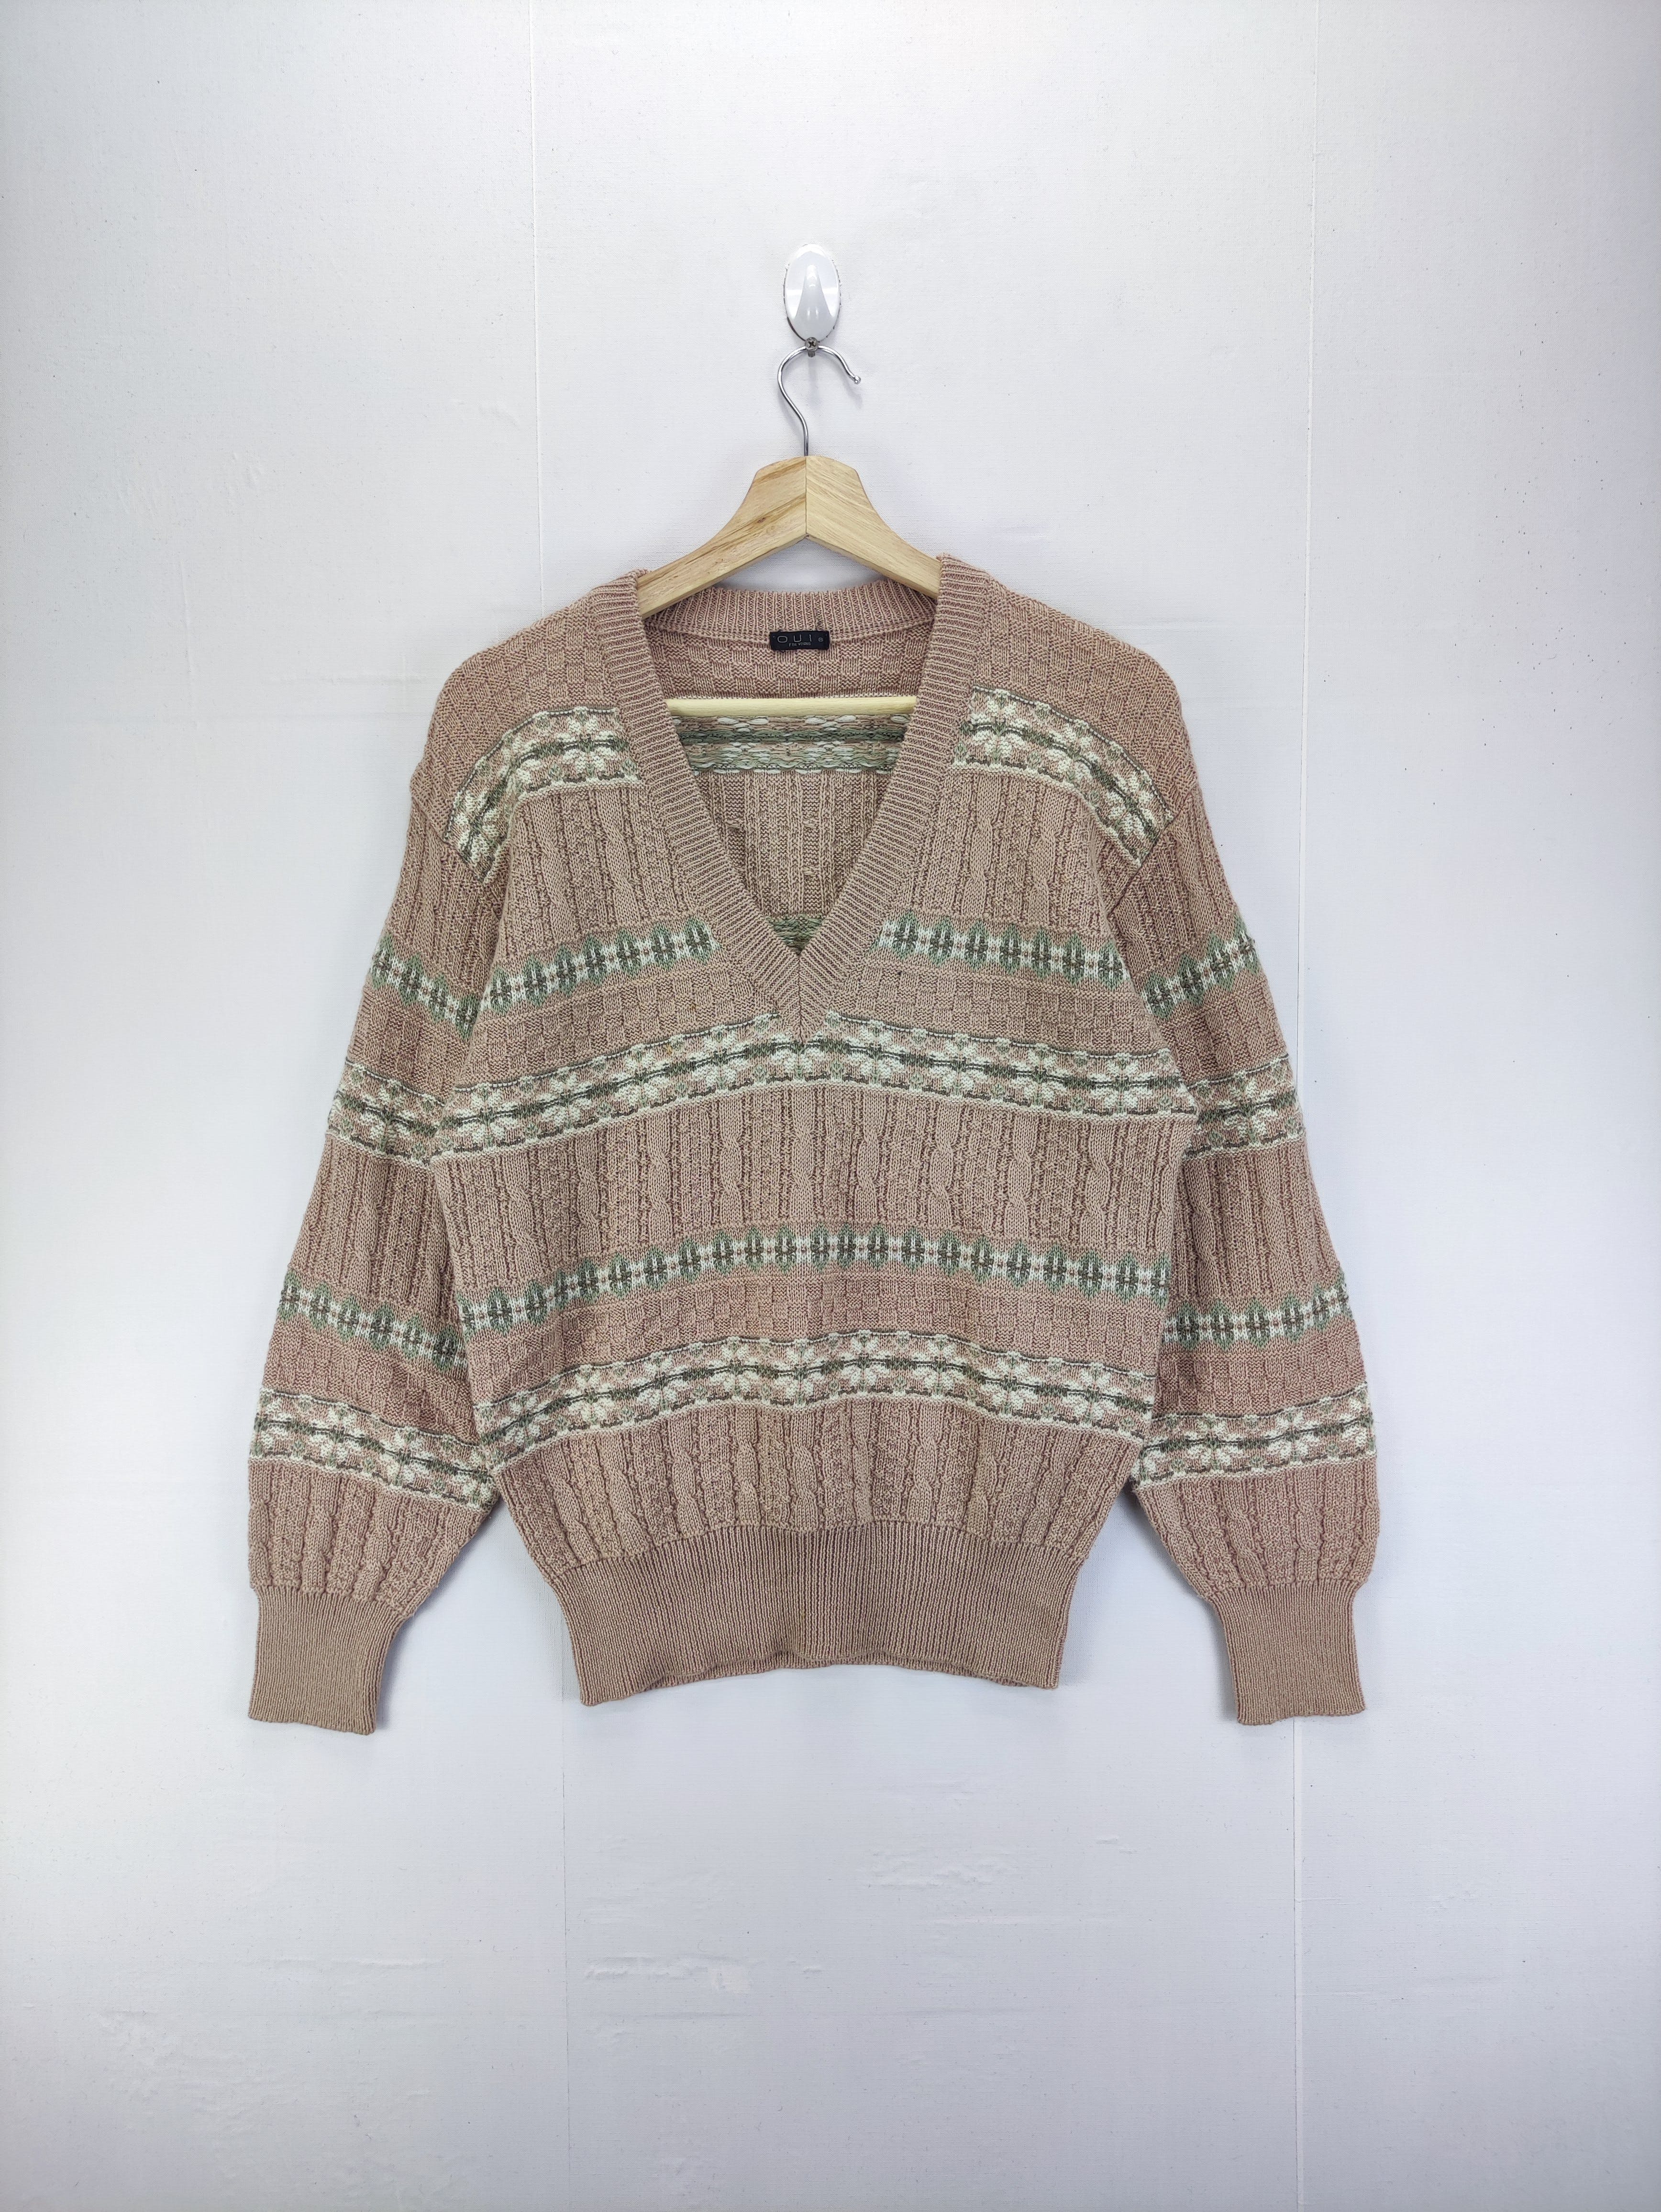 Japanese Brand - Vintage Cardigan knit Sweater By Oui - 1